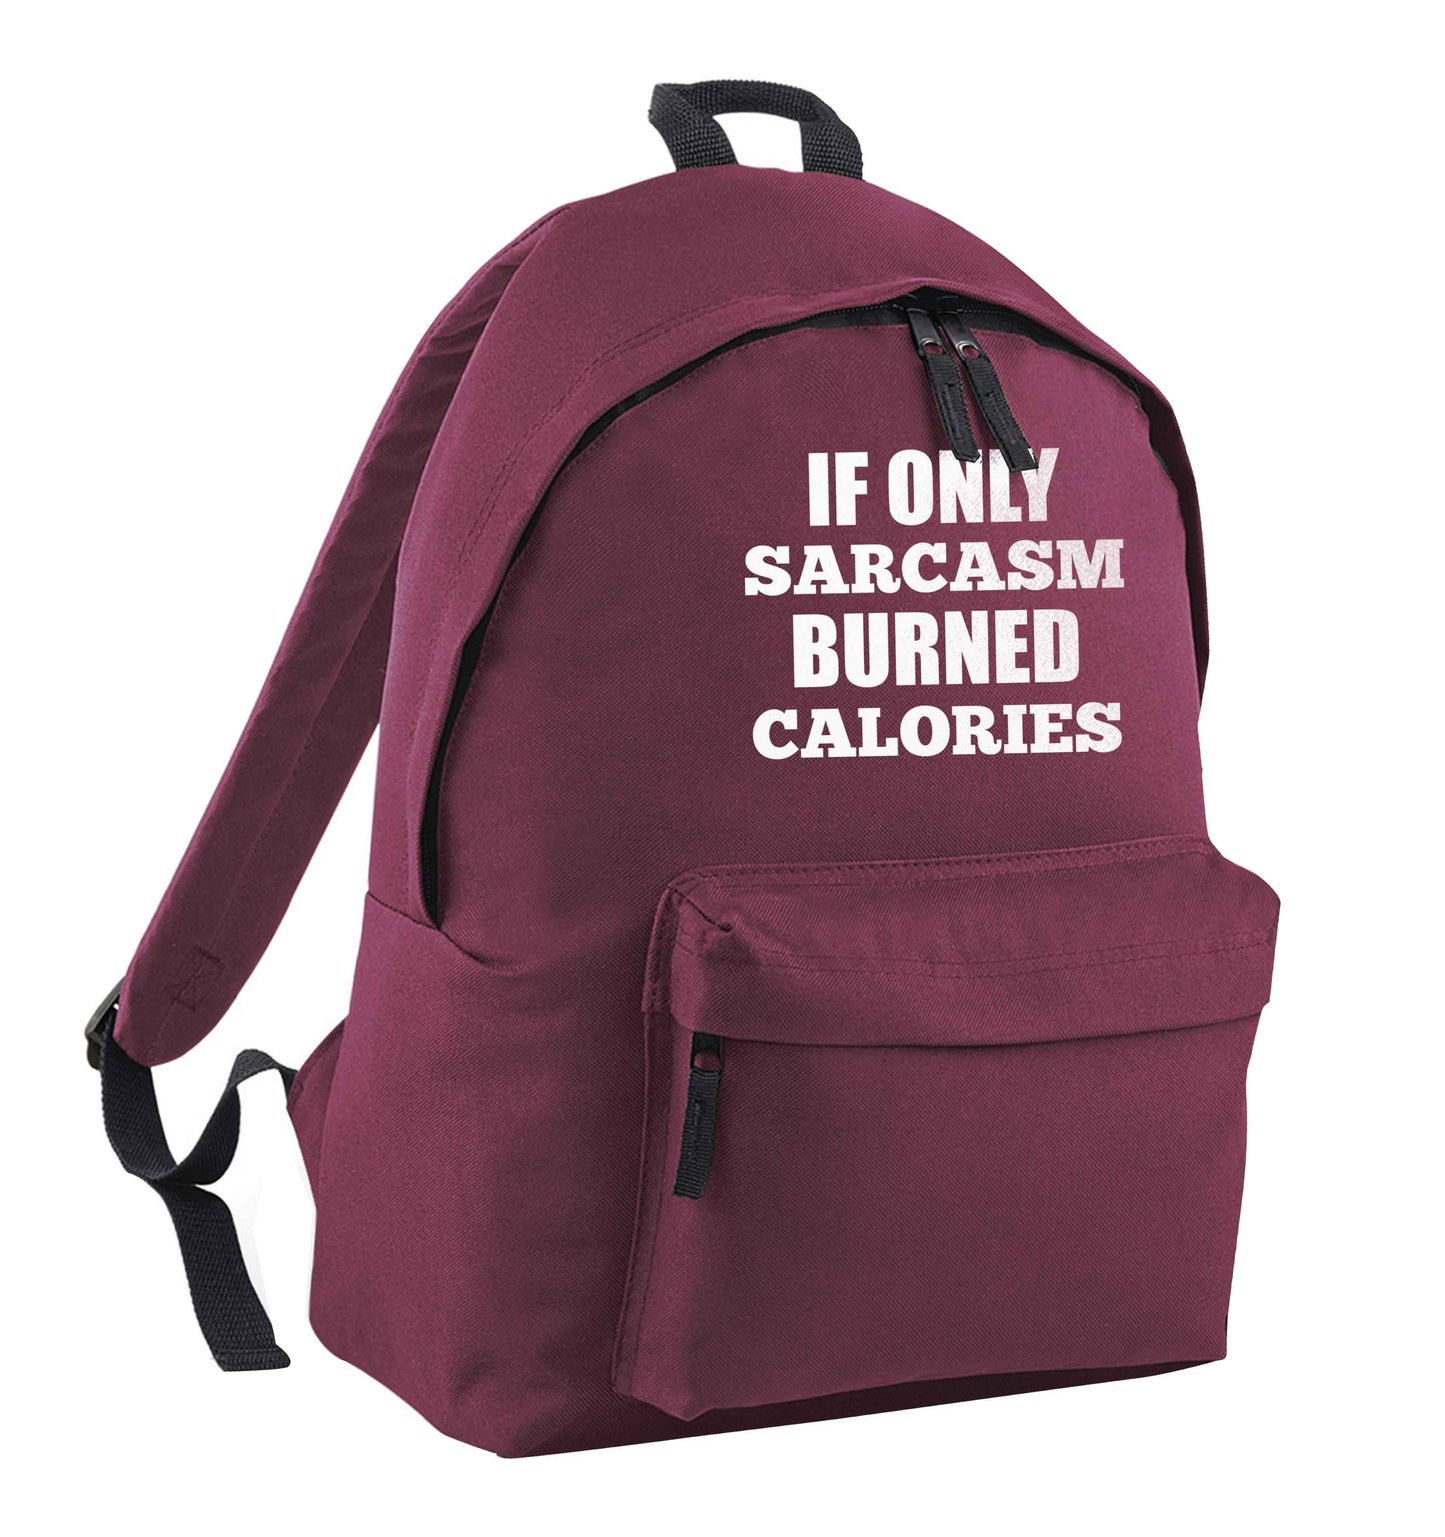 If only sarcasm burned calories maroon adults backpack